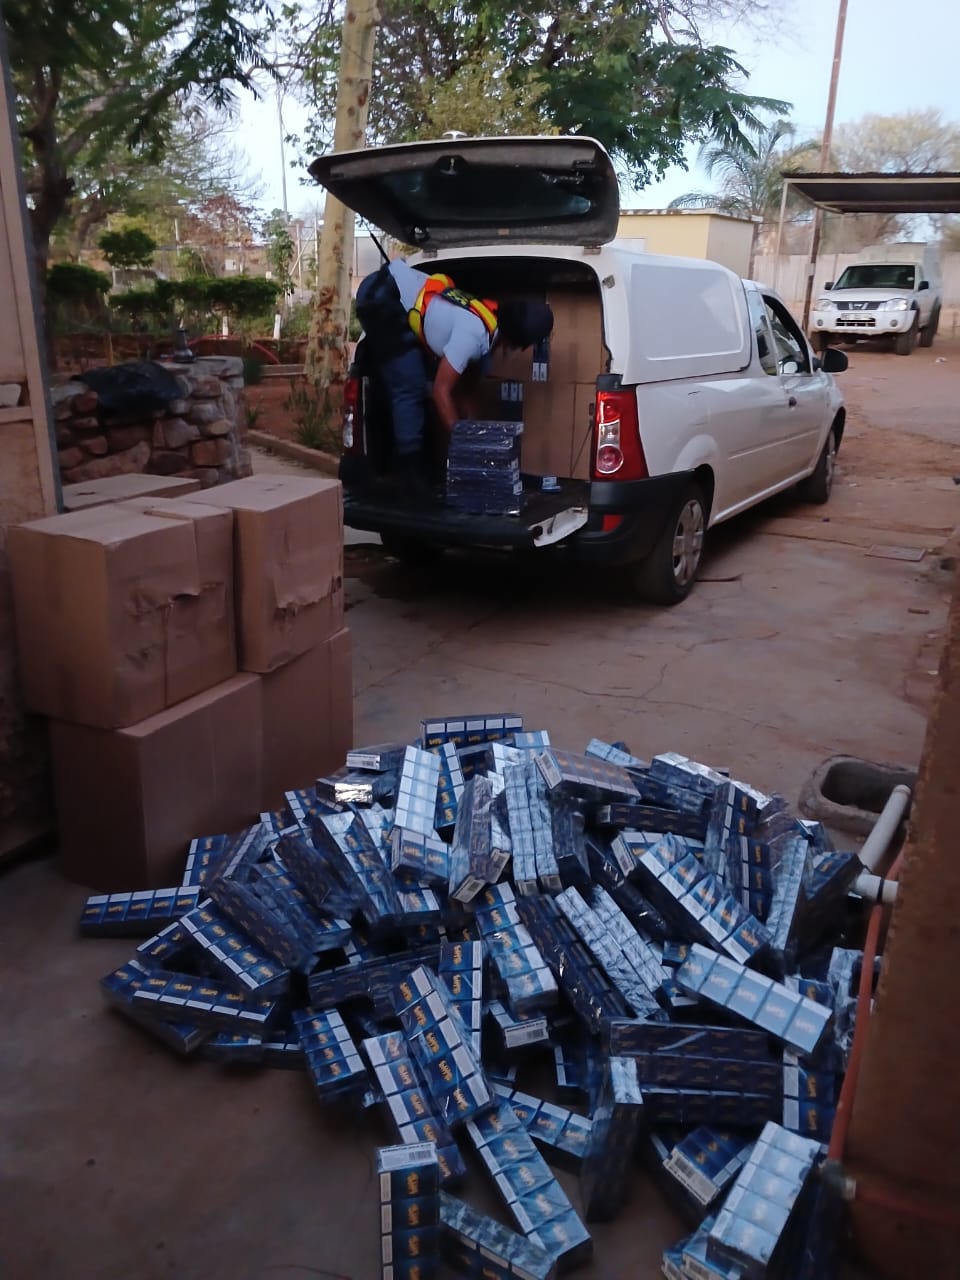 POLICE SEIZE OVER R300 000.00 WORTH OF ILLICIT CIGARETTES IN ALLDAYS AND LAUNCH MANHUNT FOR SUSPECTS